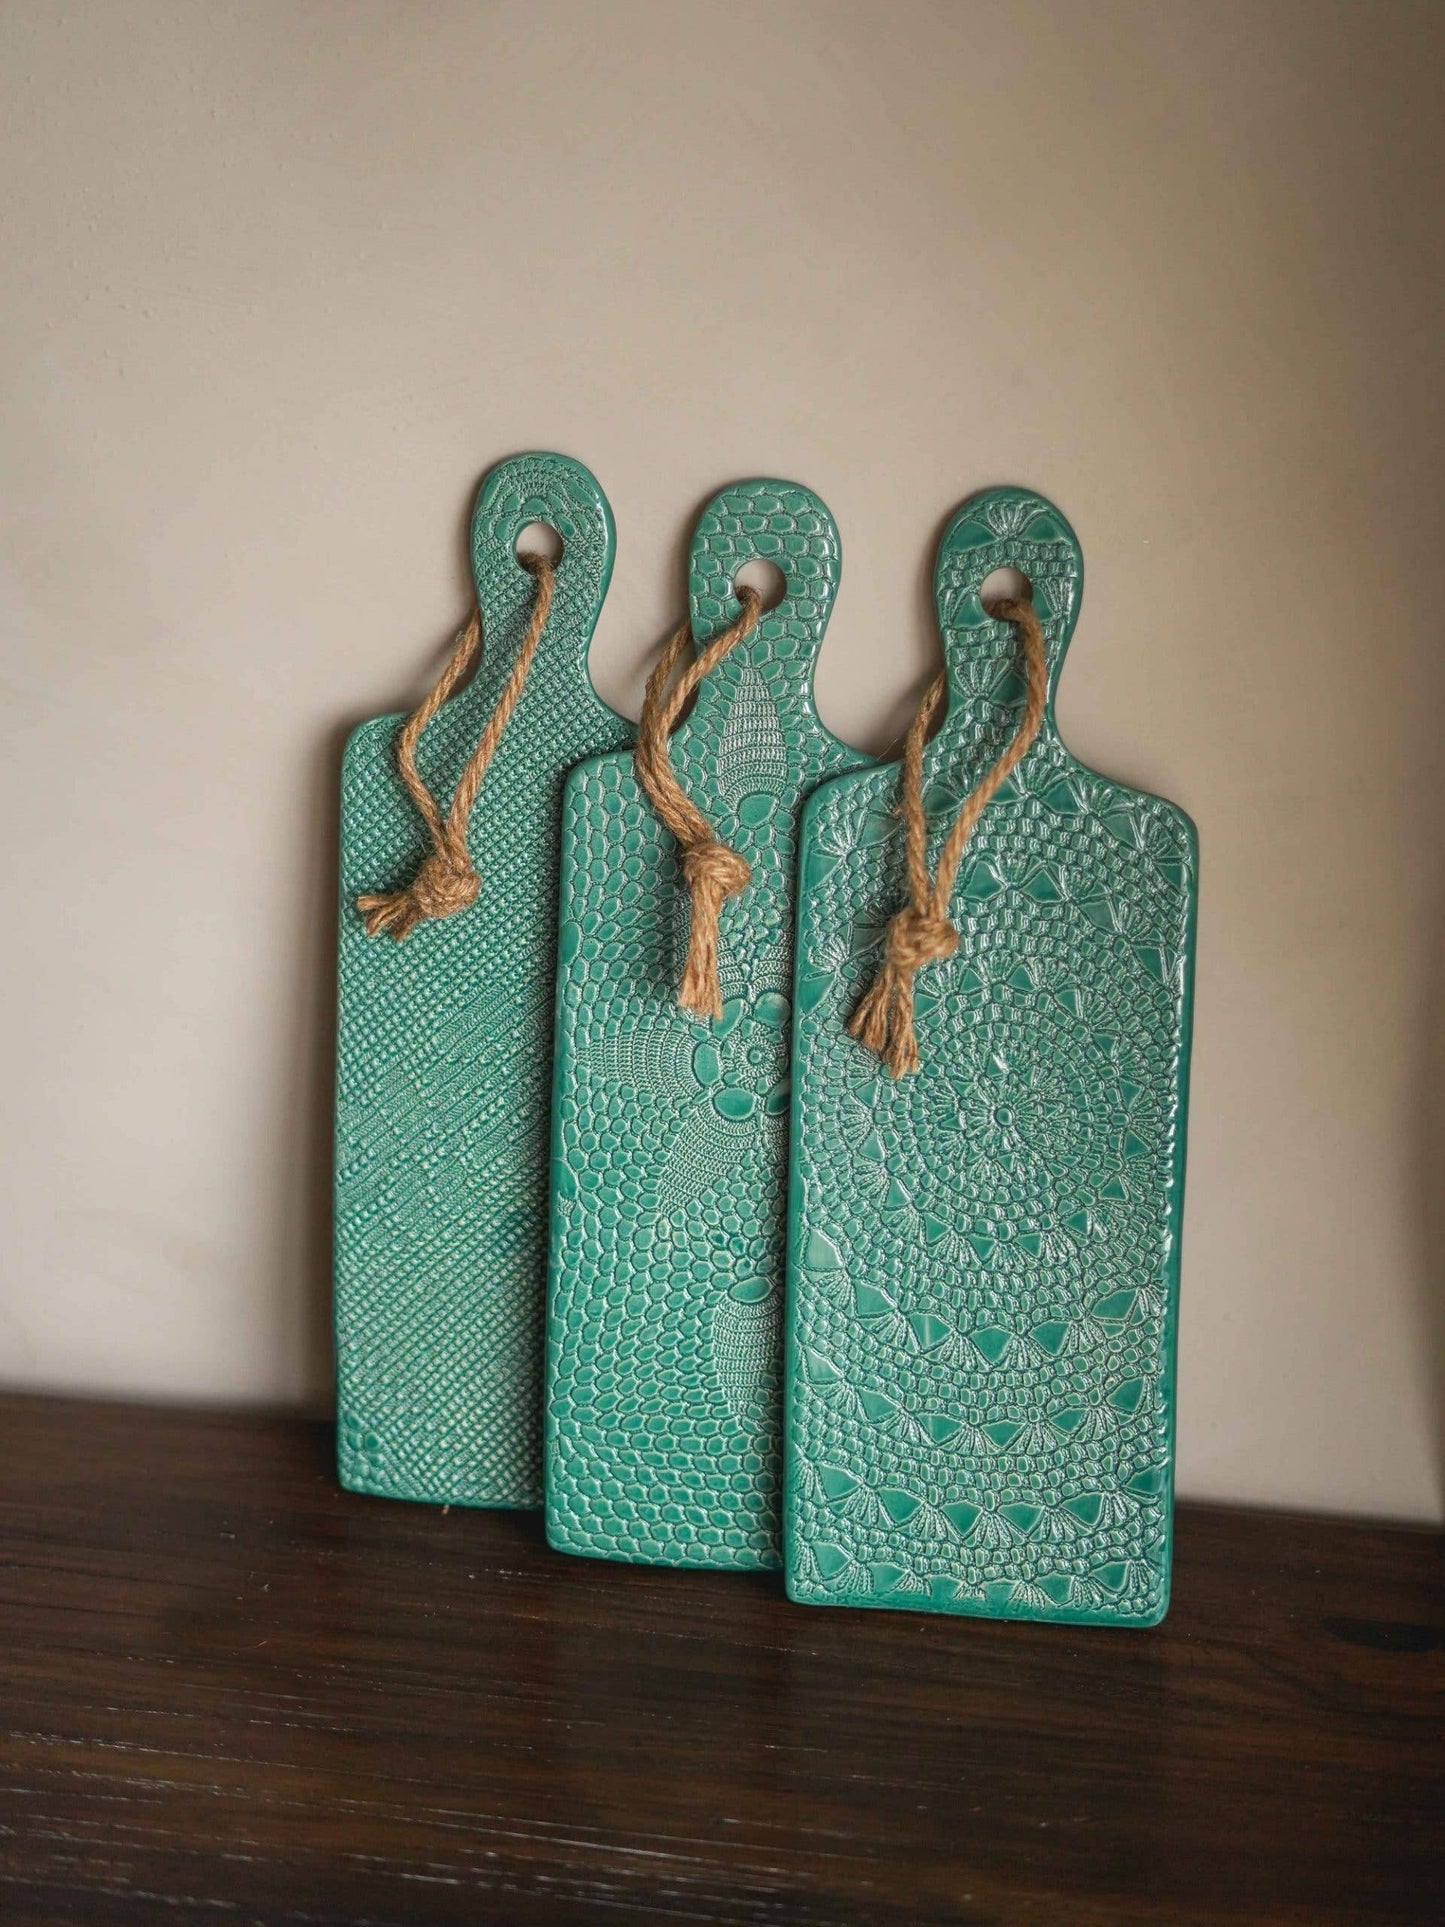 3 blue crafted porcelain boards with crochet pattern